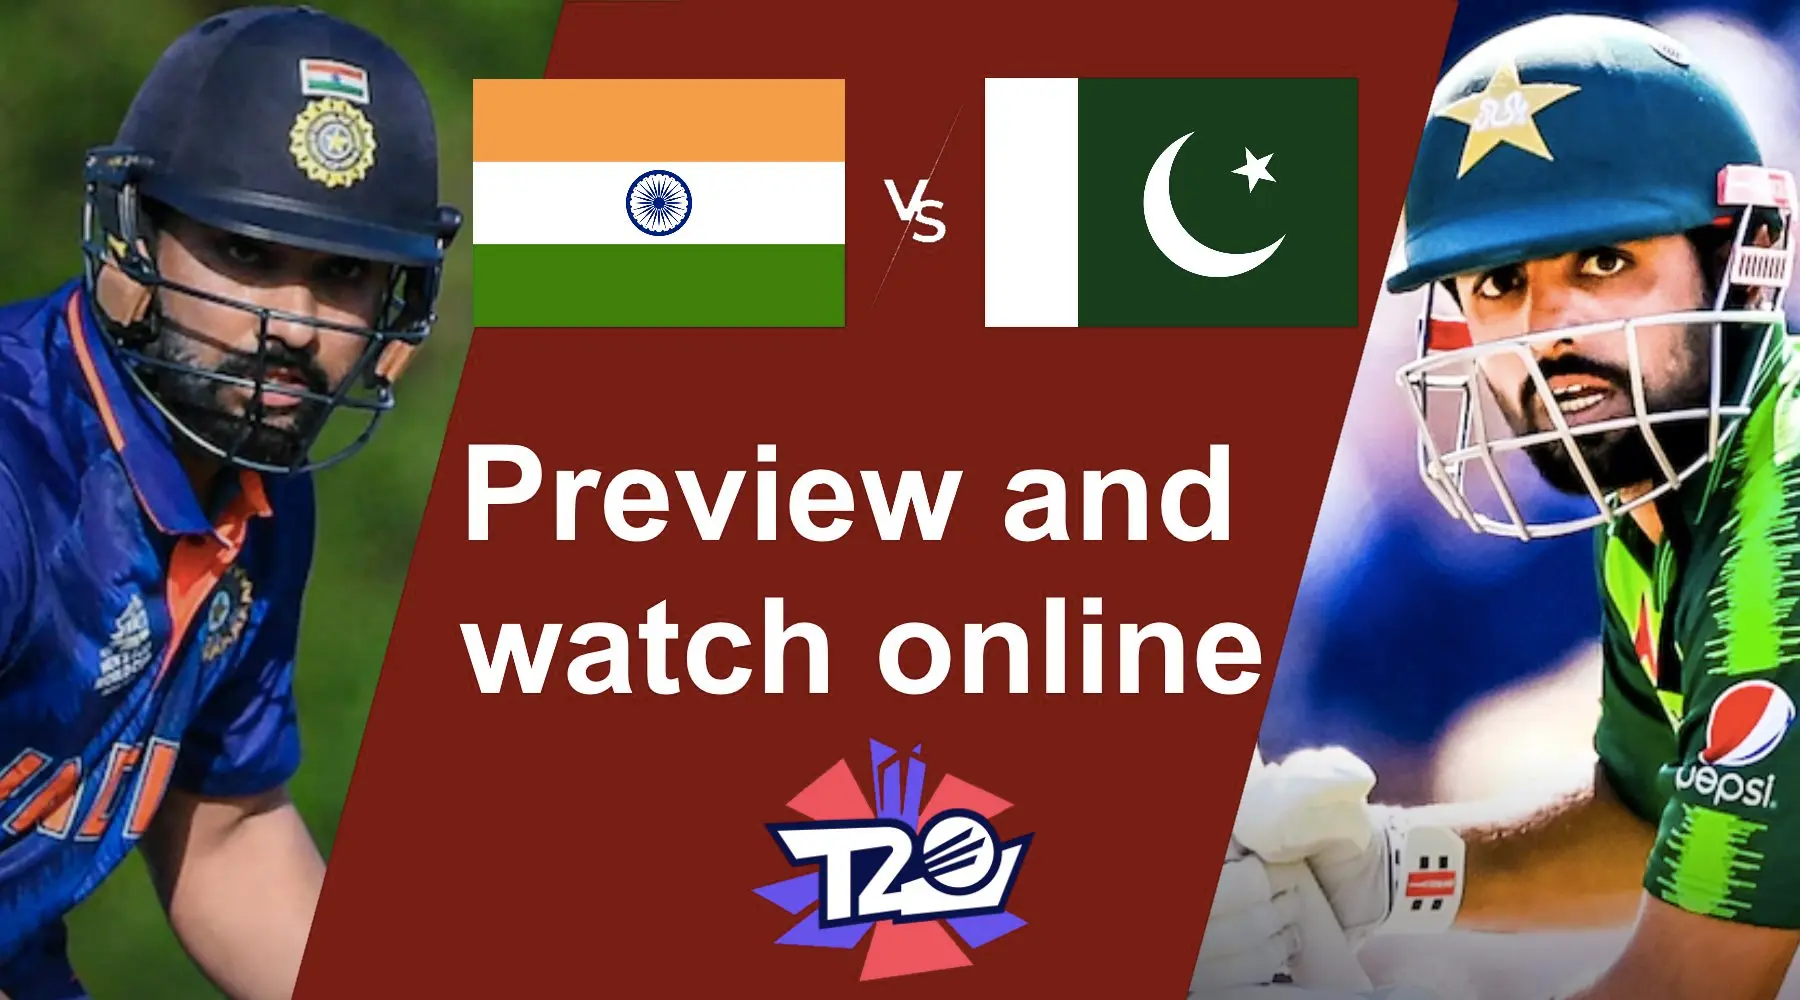 How to watch India vs Pakistan T20 World Cup live online in Australia